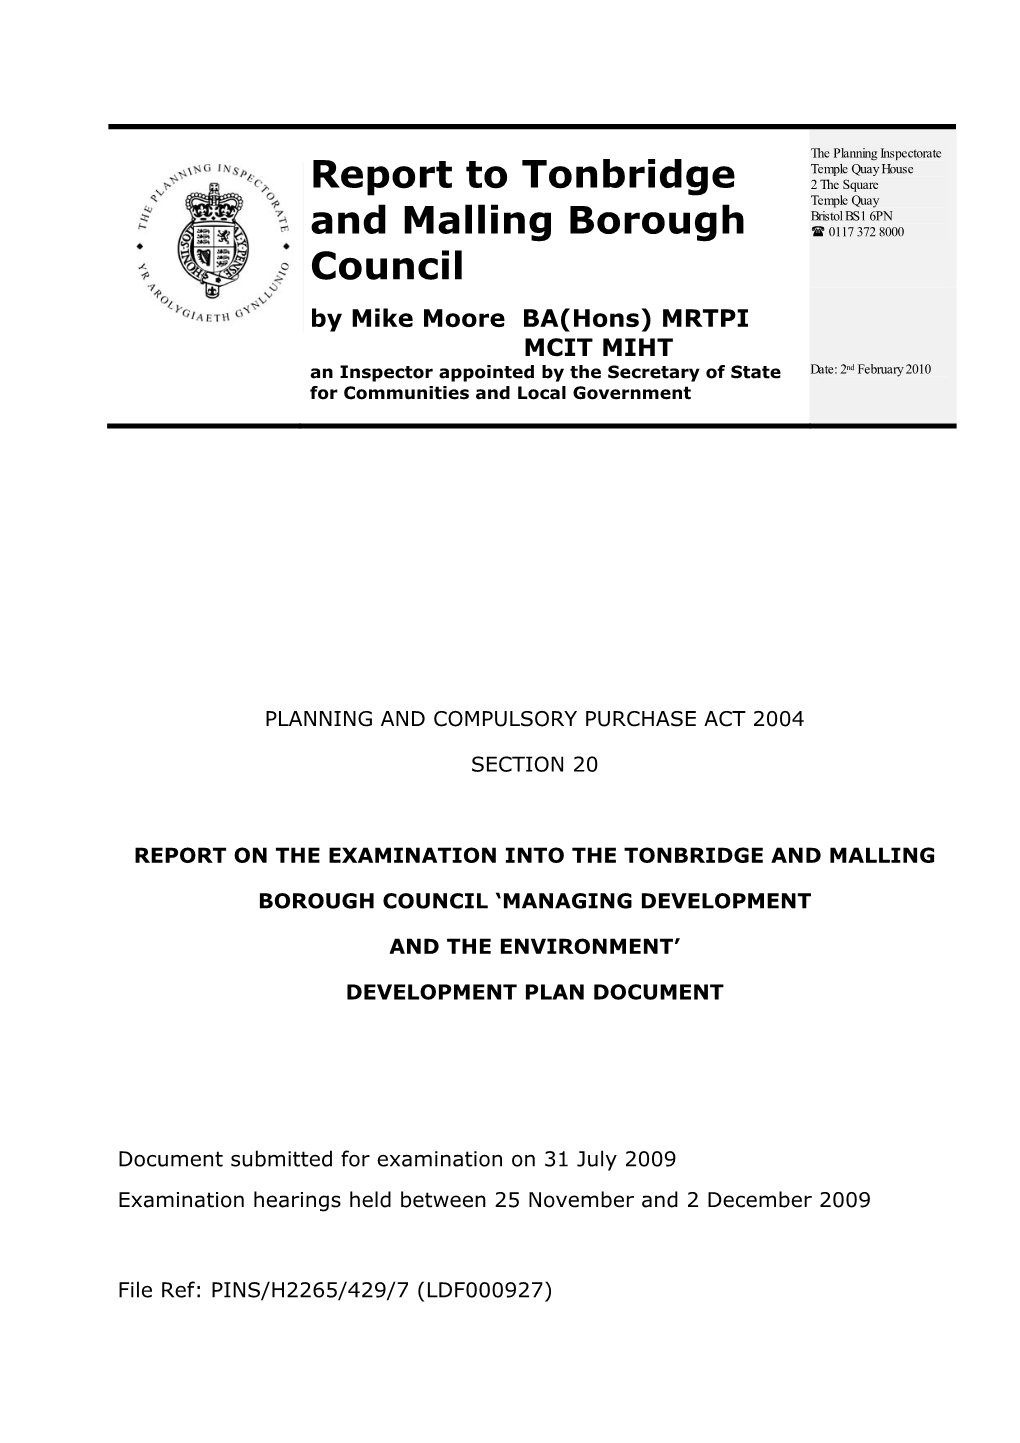 Inspector's Report Into the Soundness of the Managing Development And